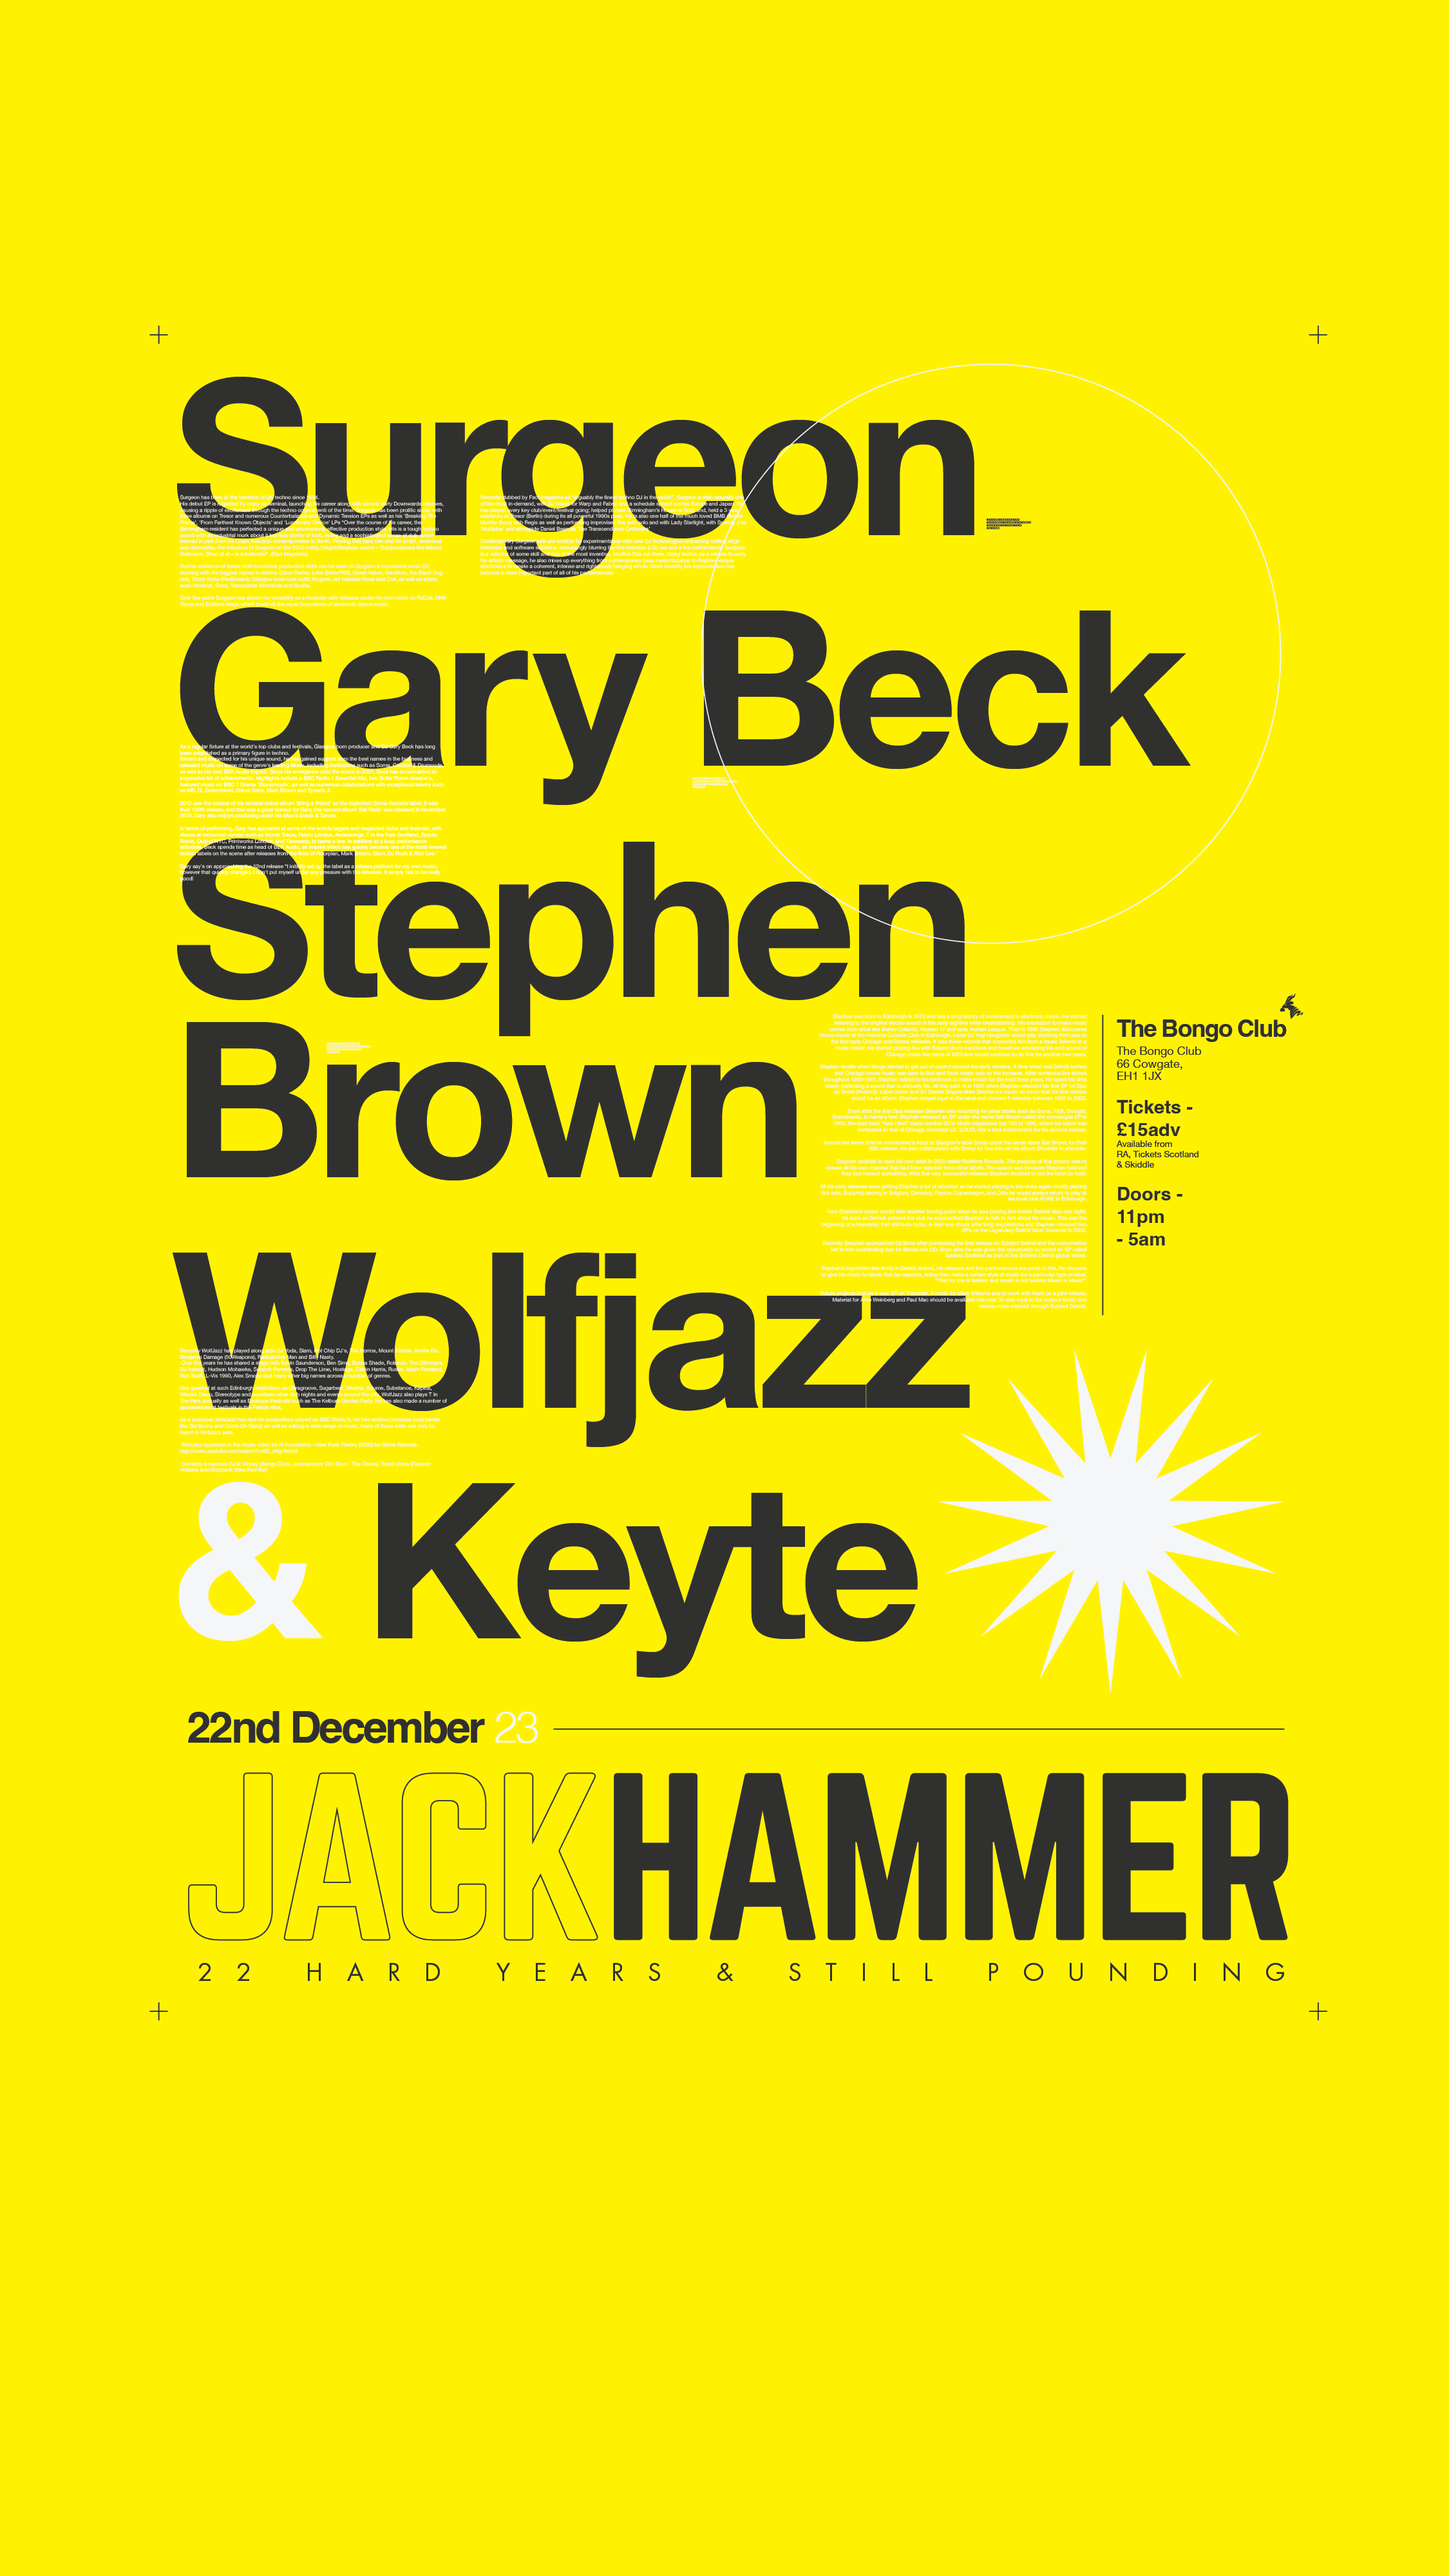 Jackhammer with Surgeon, Gary Beck and Stephen Brown - フライヤー表